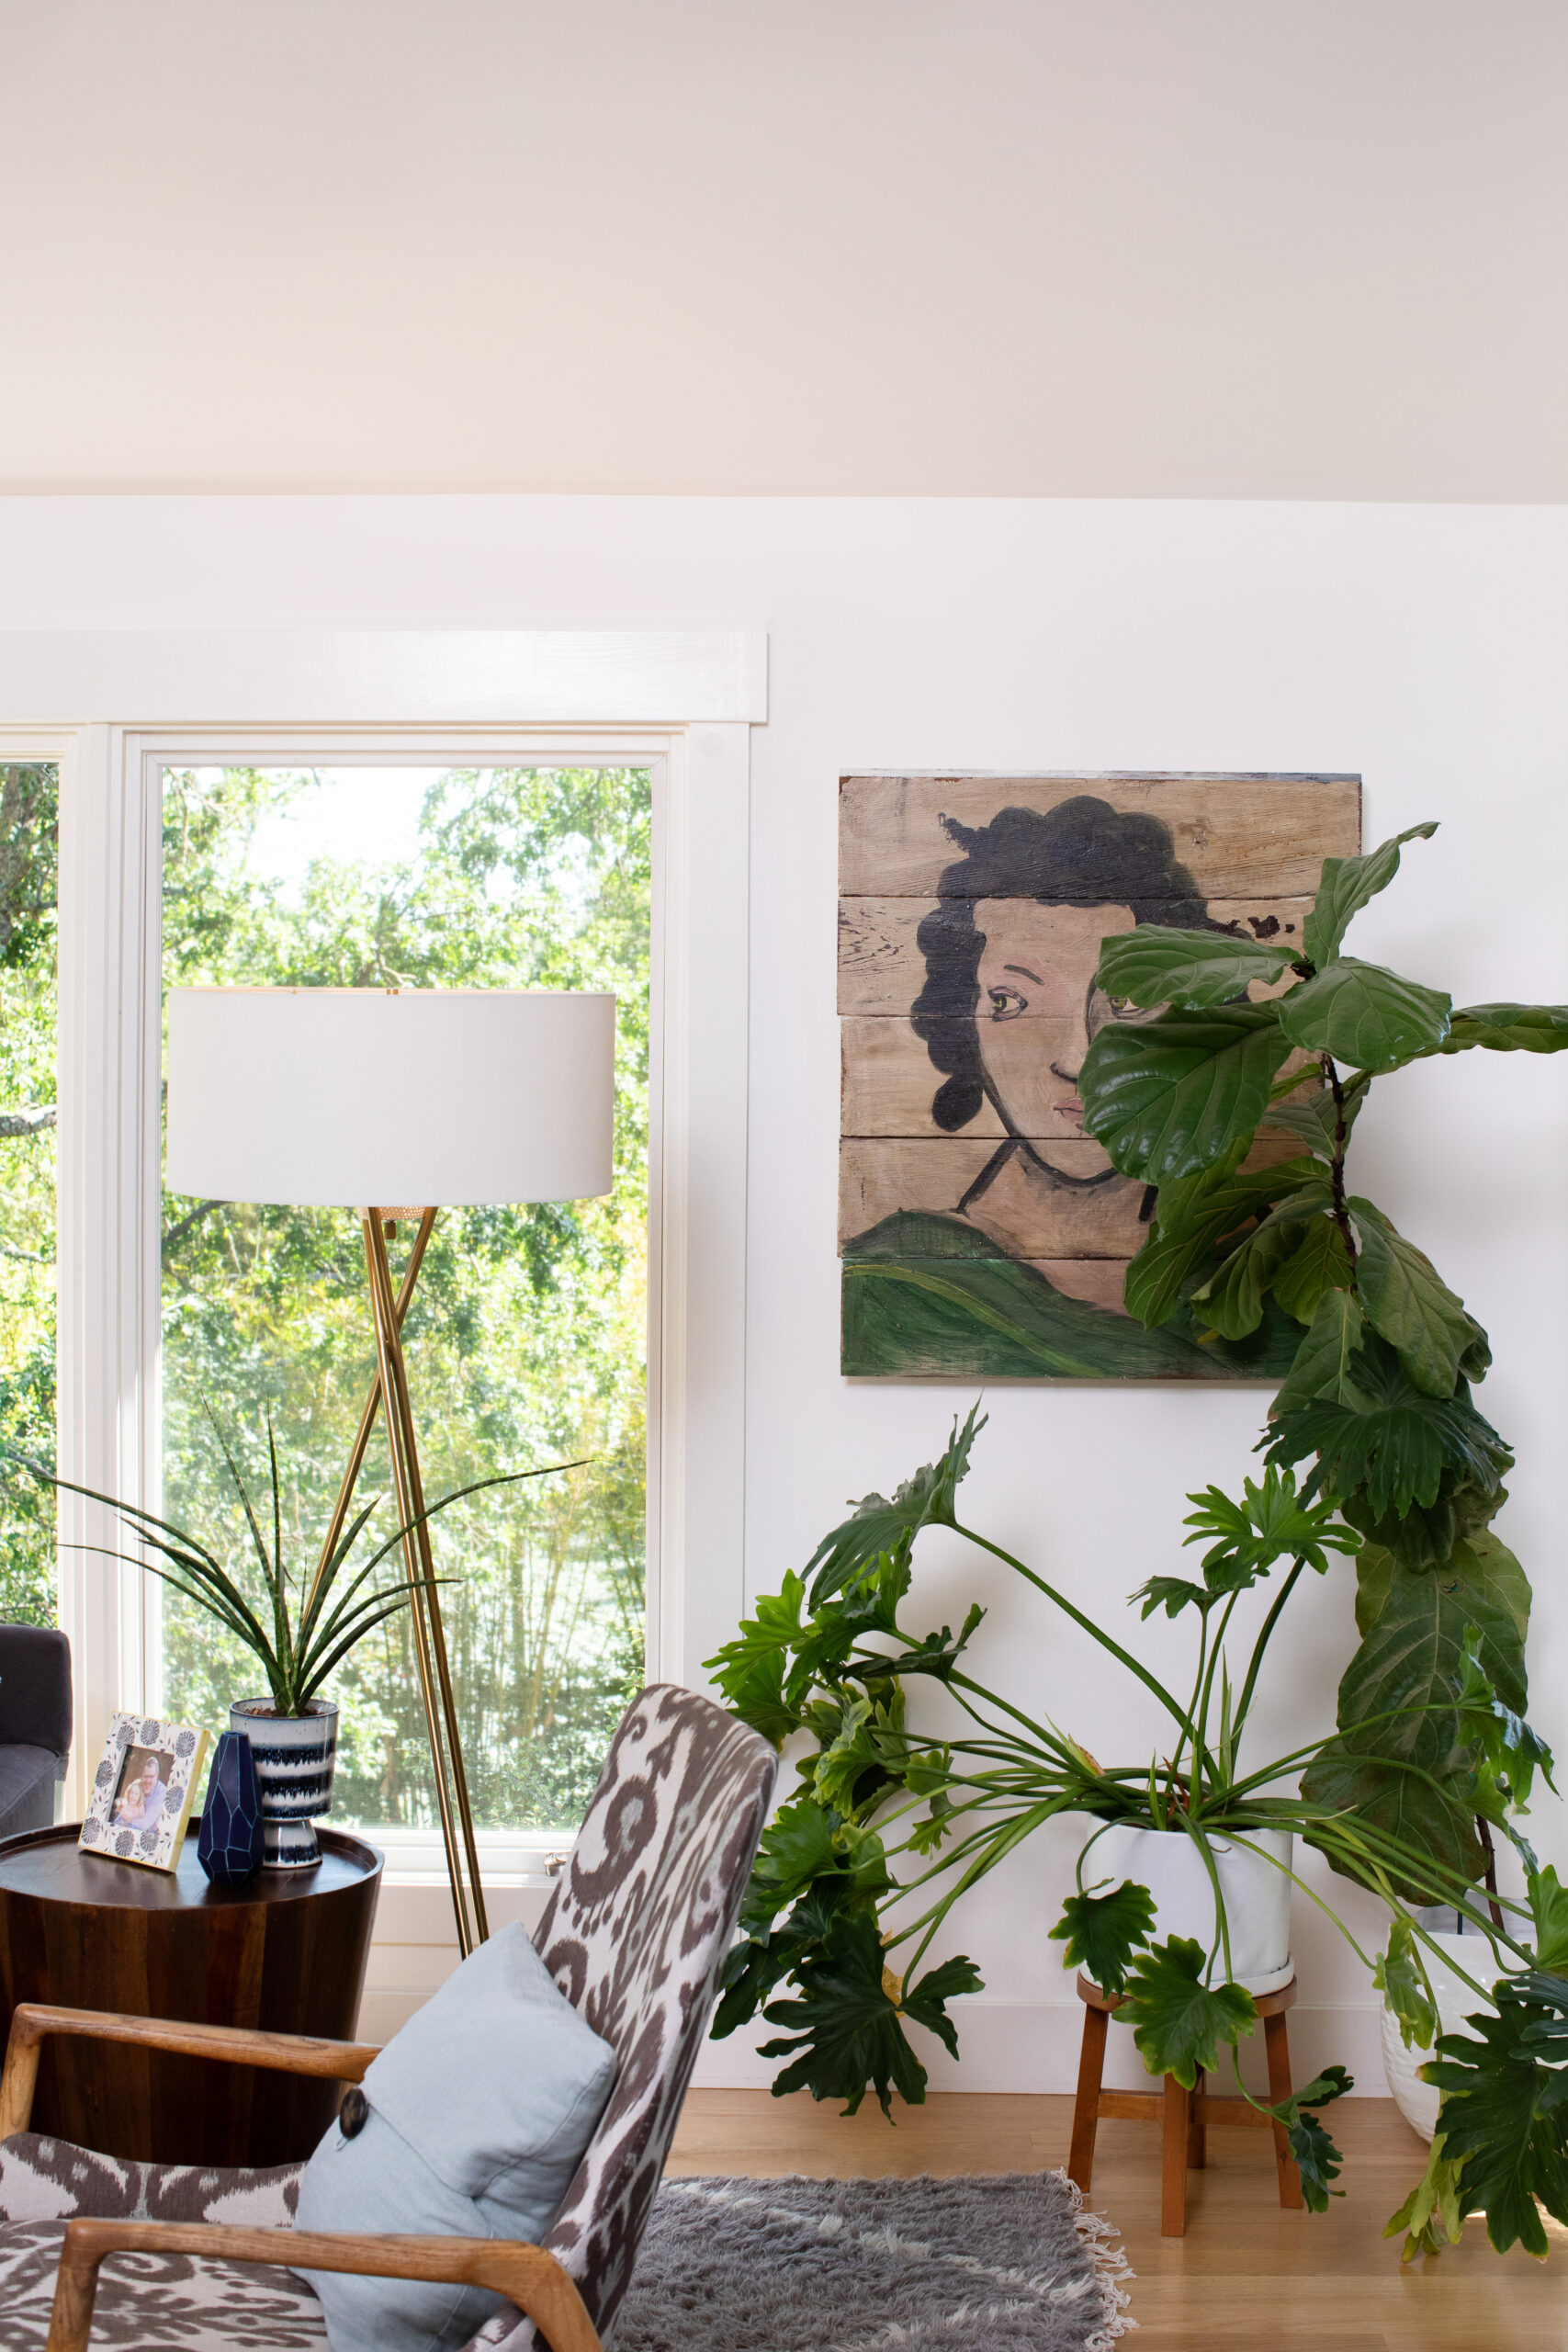 Jennifer and Mike bought the portrait, which is painted on wood, years ago from local designer Myra Hoefer. Lush plants further the home’s indoor-outdoor connections. (Eileen Roche)